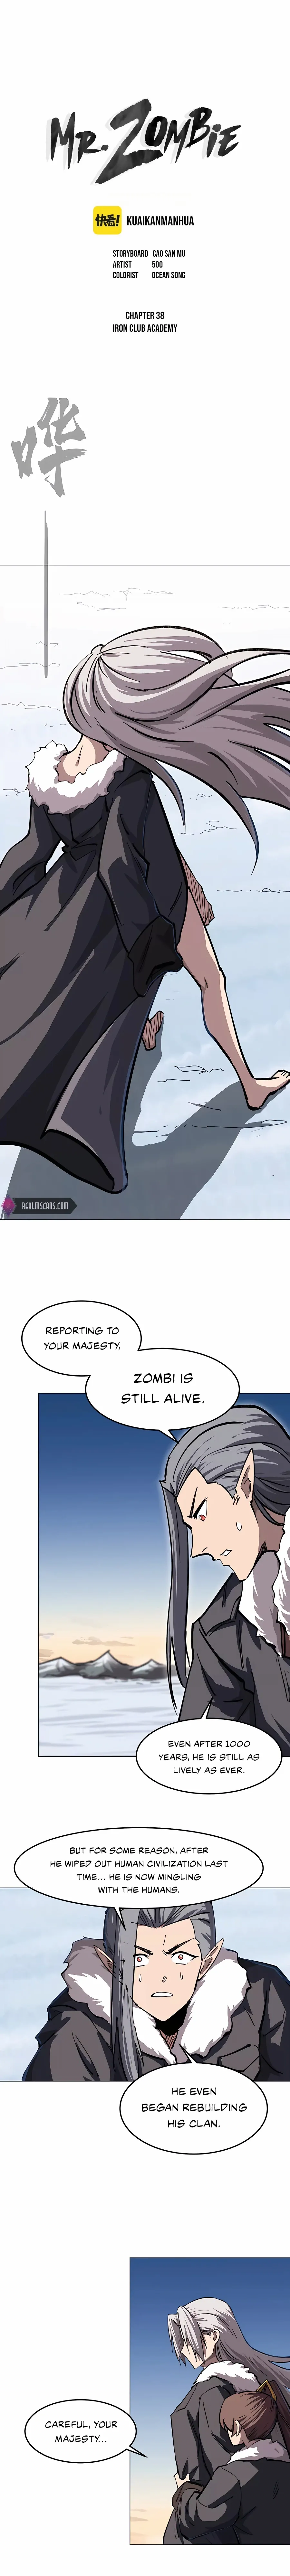 Mr. Zombie Chapter 38 - Page 1